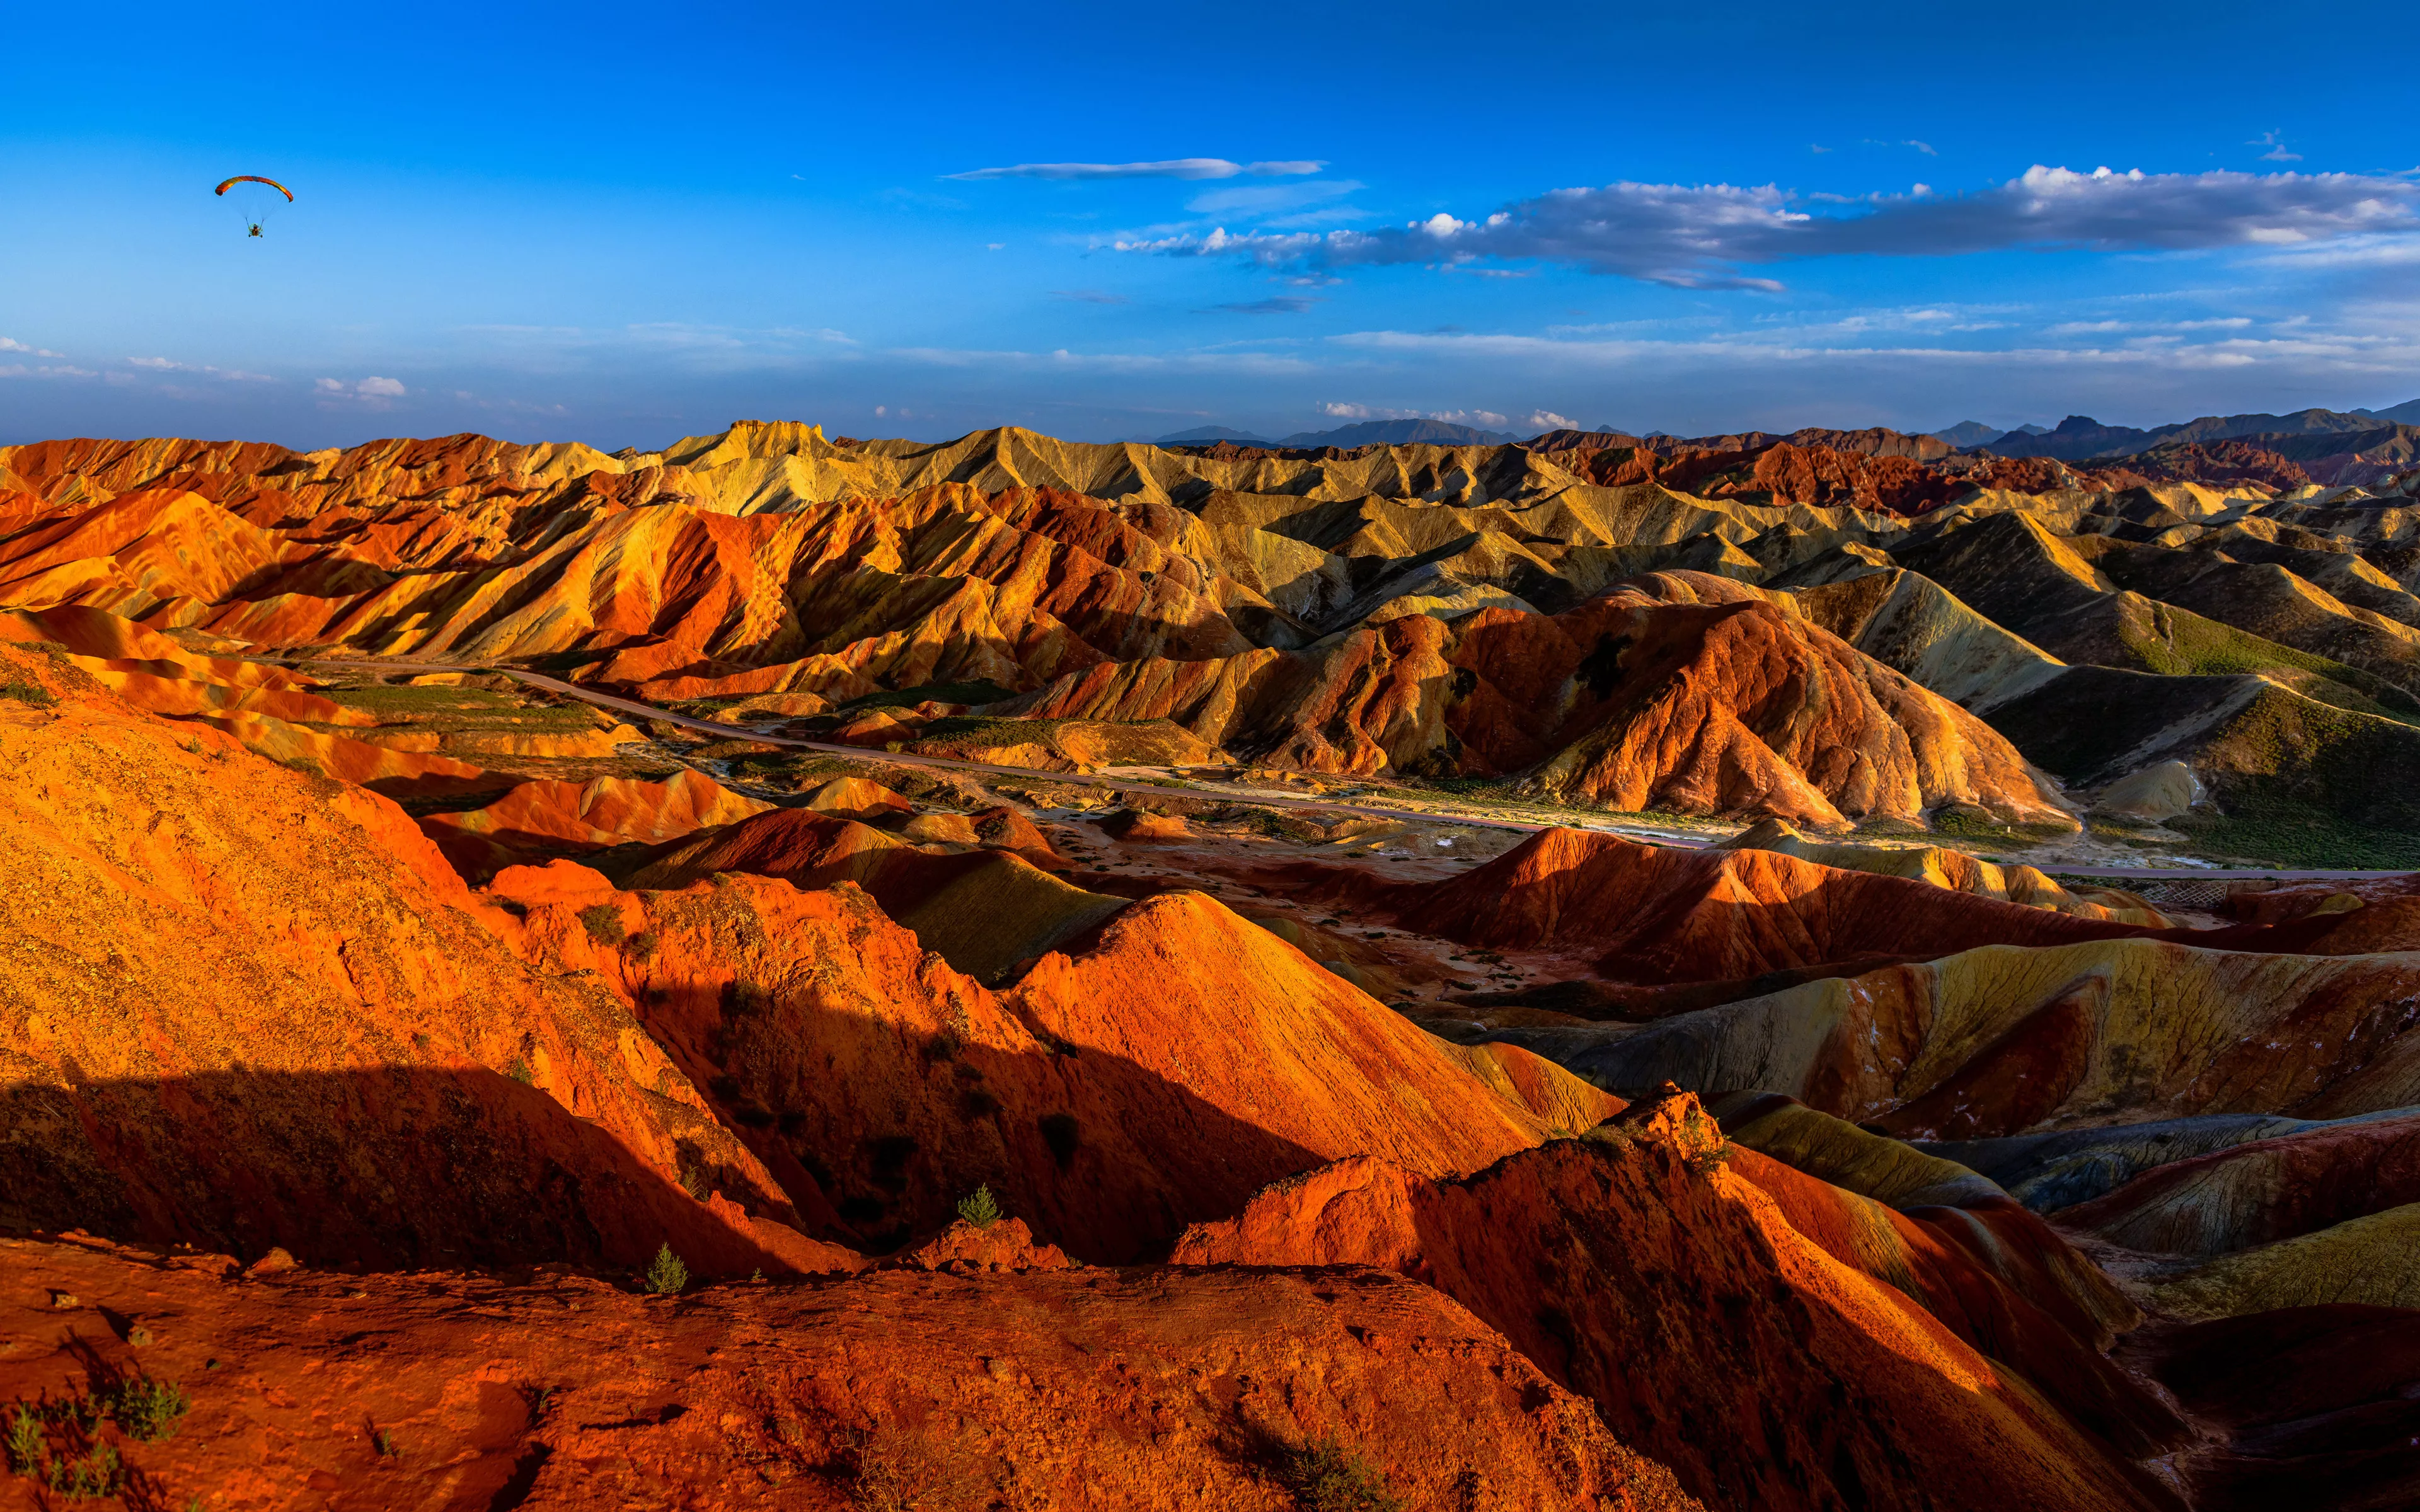 Zhangye Danxia Geopark in China, East Asia | Nature Reserves,Parks - Rated 3.6